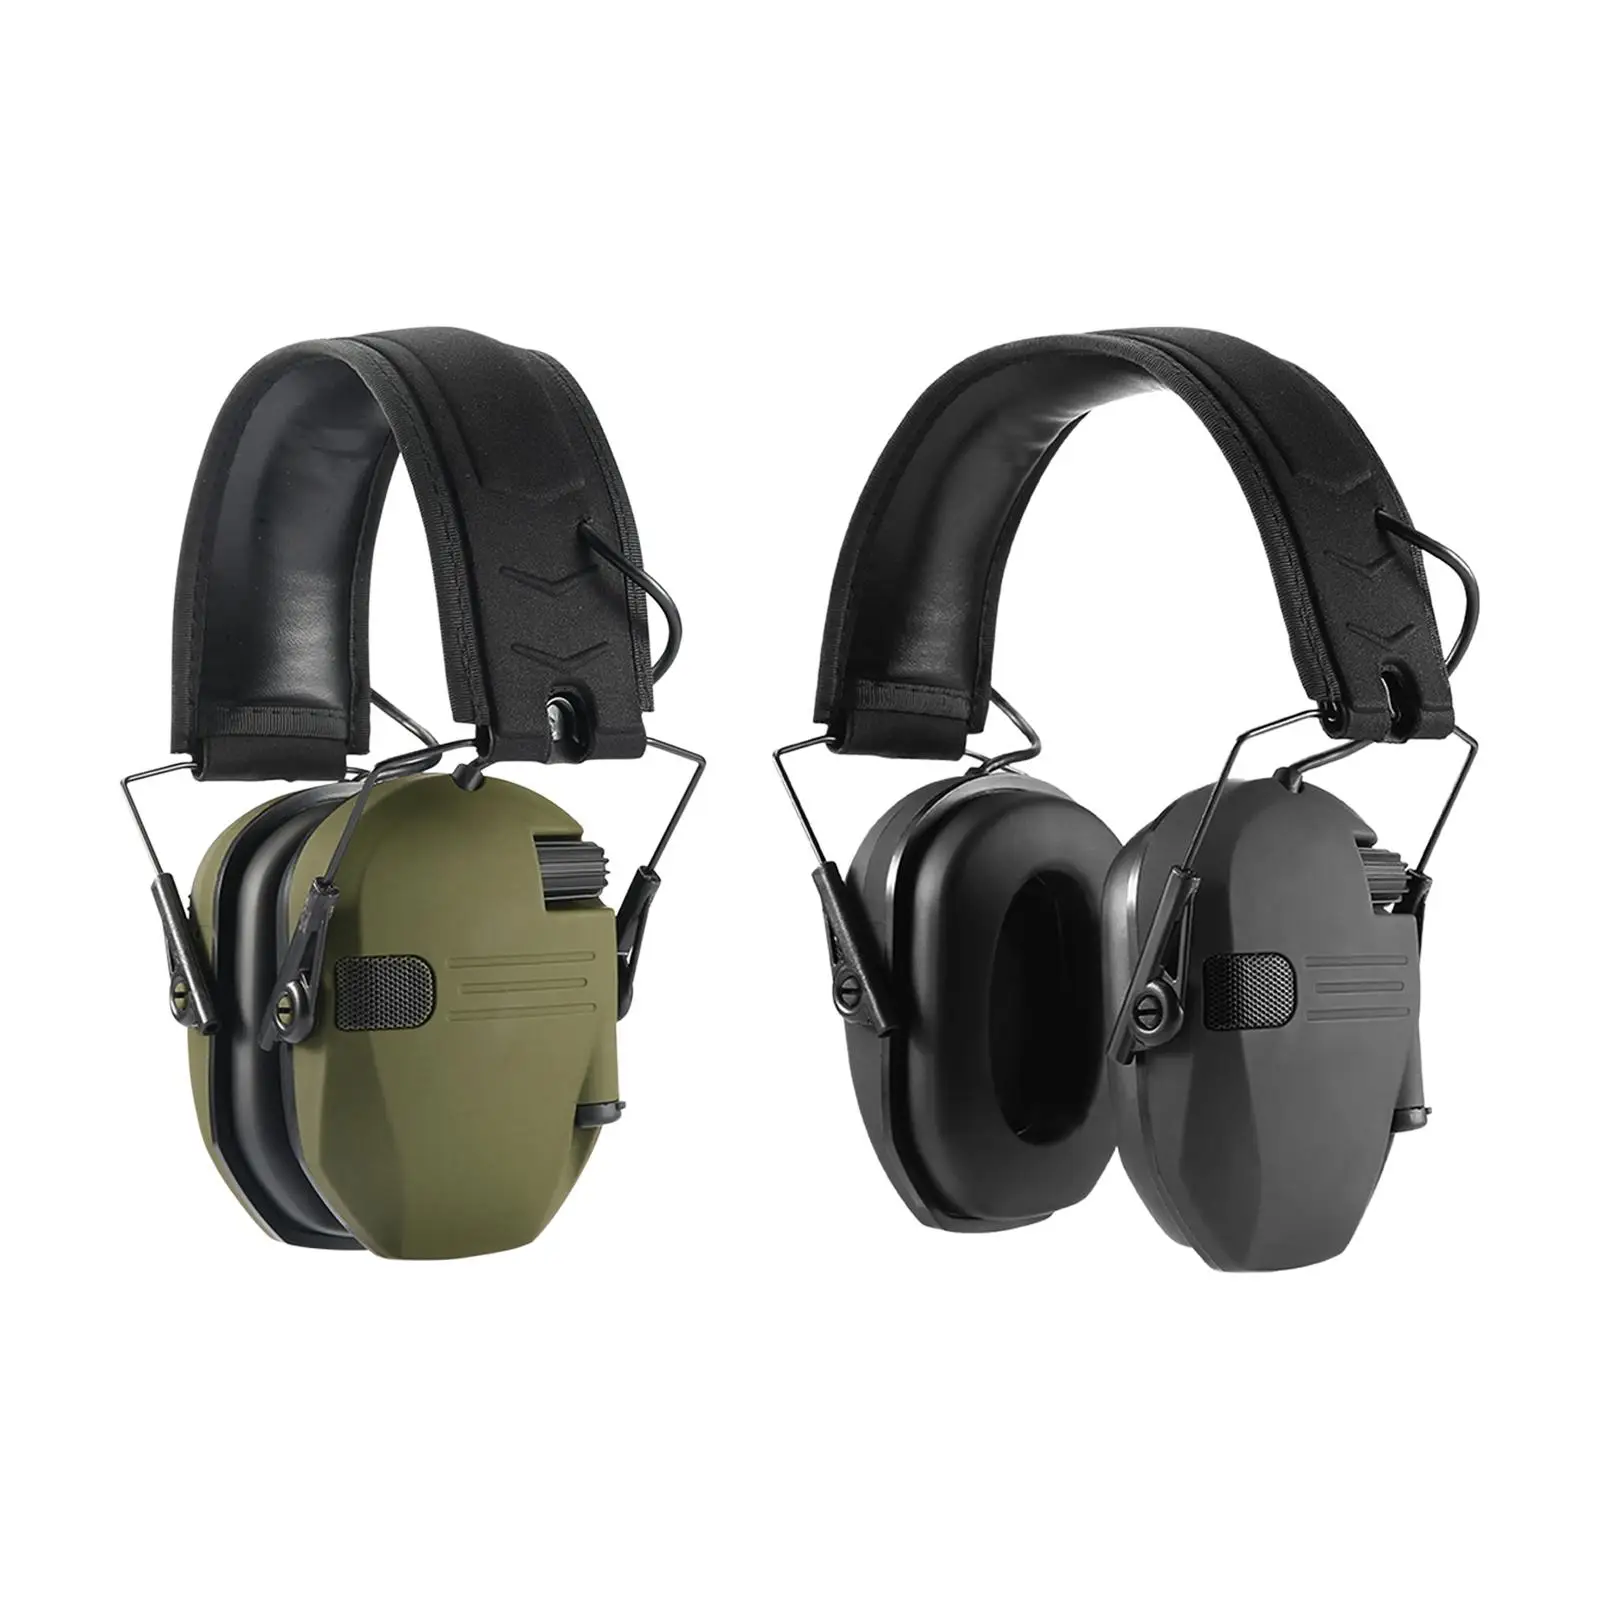 

Electronic Earmuffs Soundproof Safety Ear Protection Head Mounted Noise Reduction Ear Muffs for Study Work Mowing